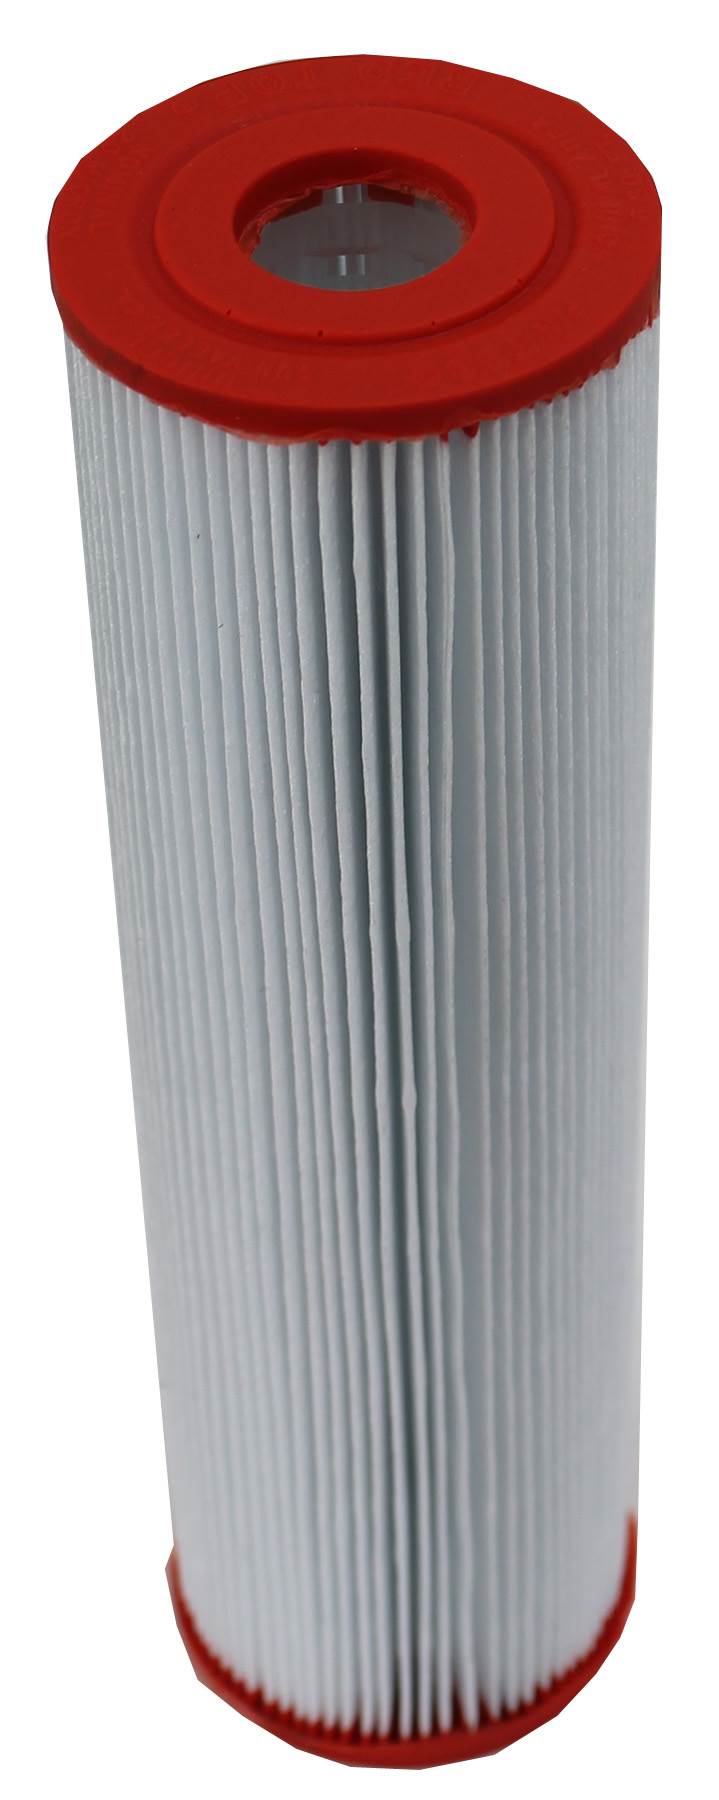 2) NEW Unicel T-380 T-380R Harmsco Replacement Swimming Pool Cartridge Filters